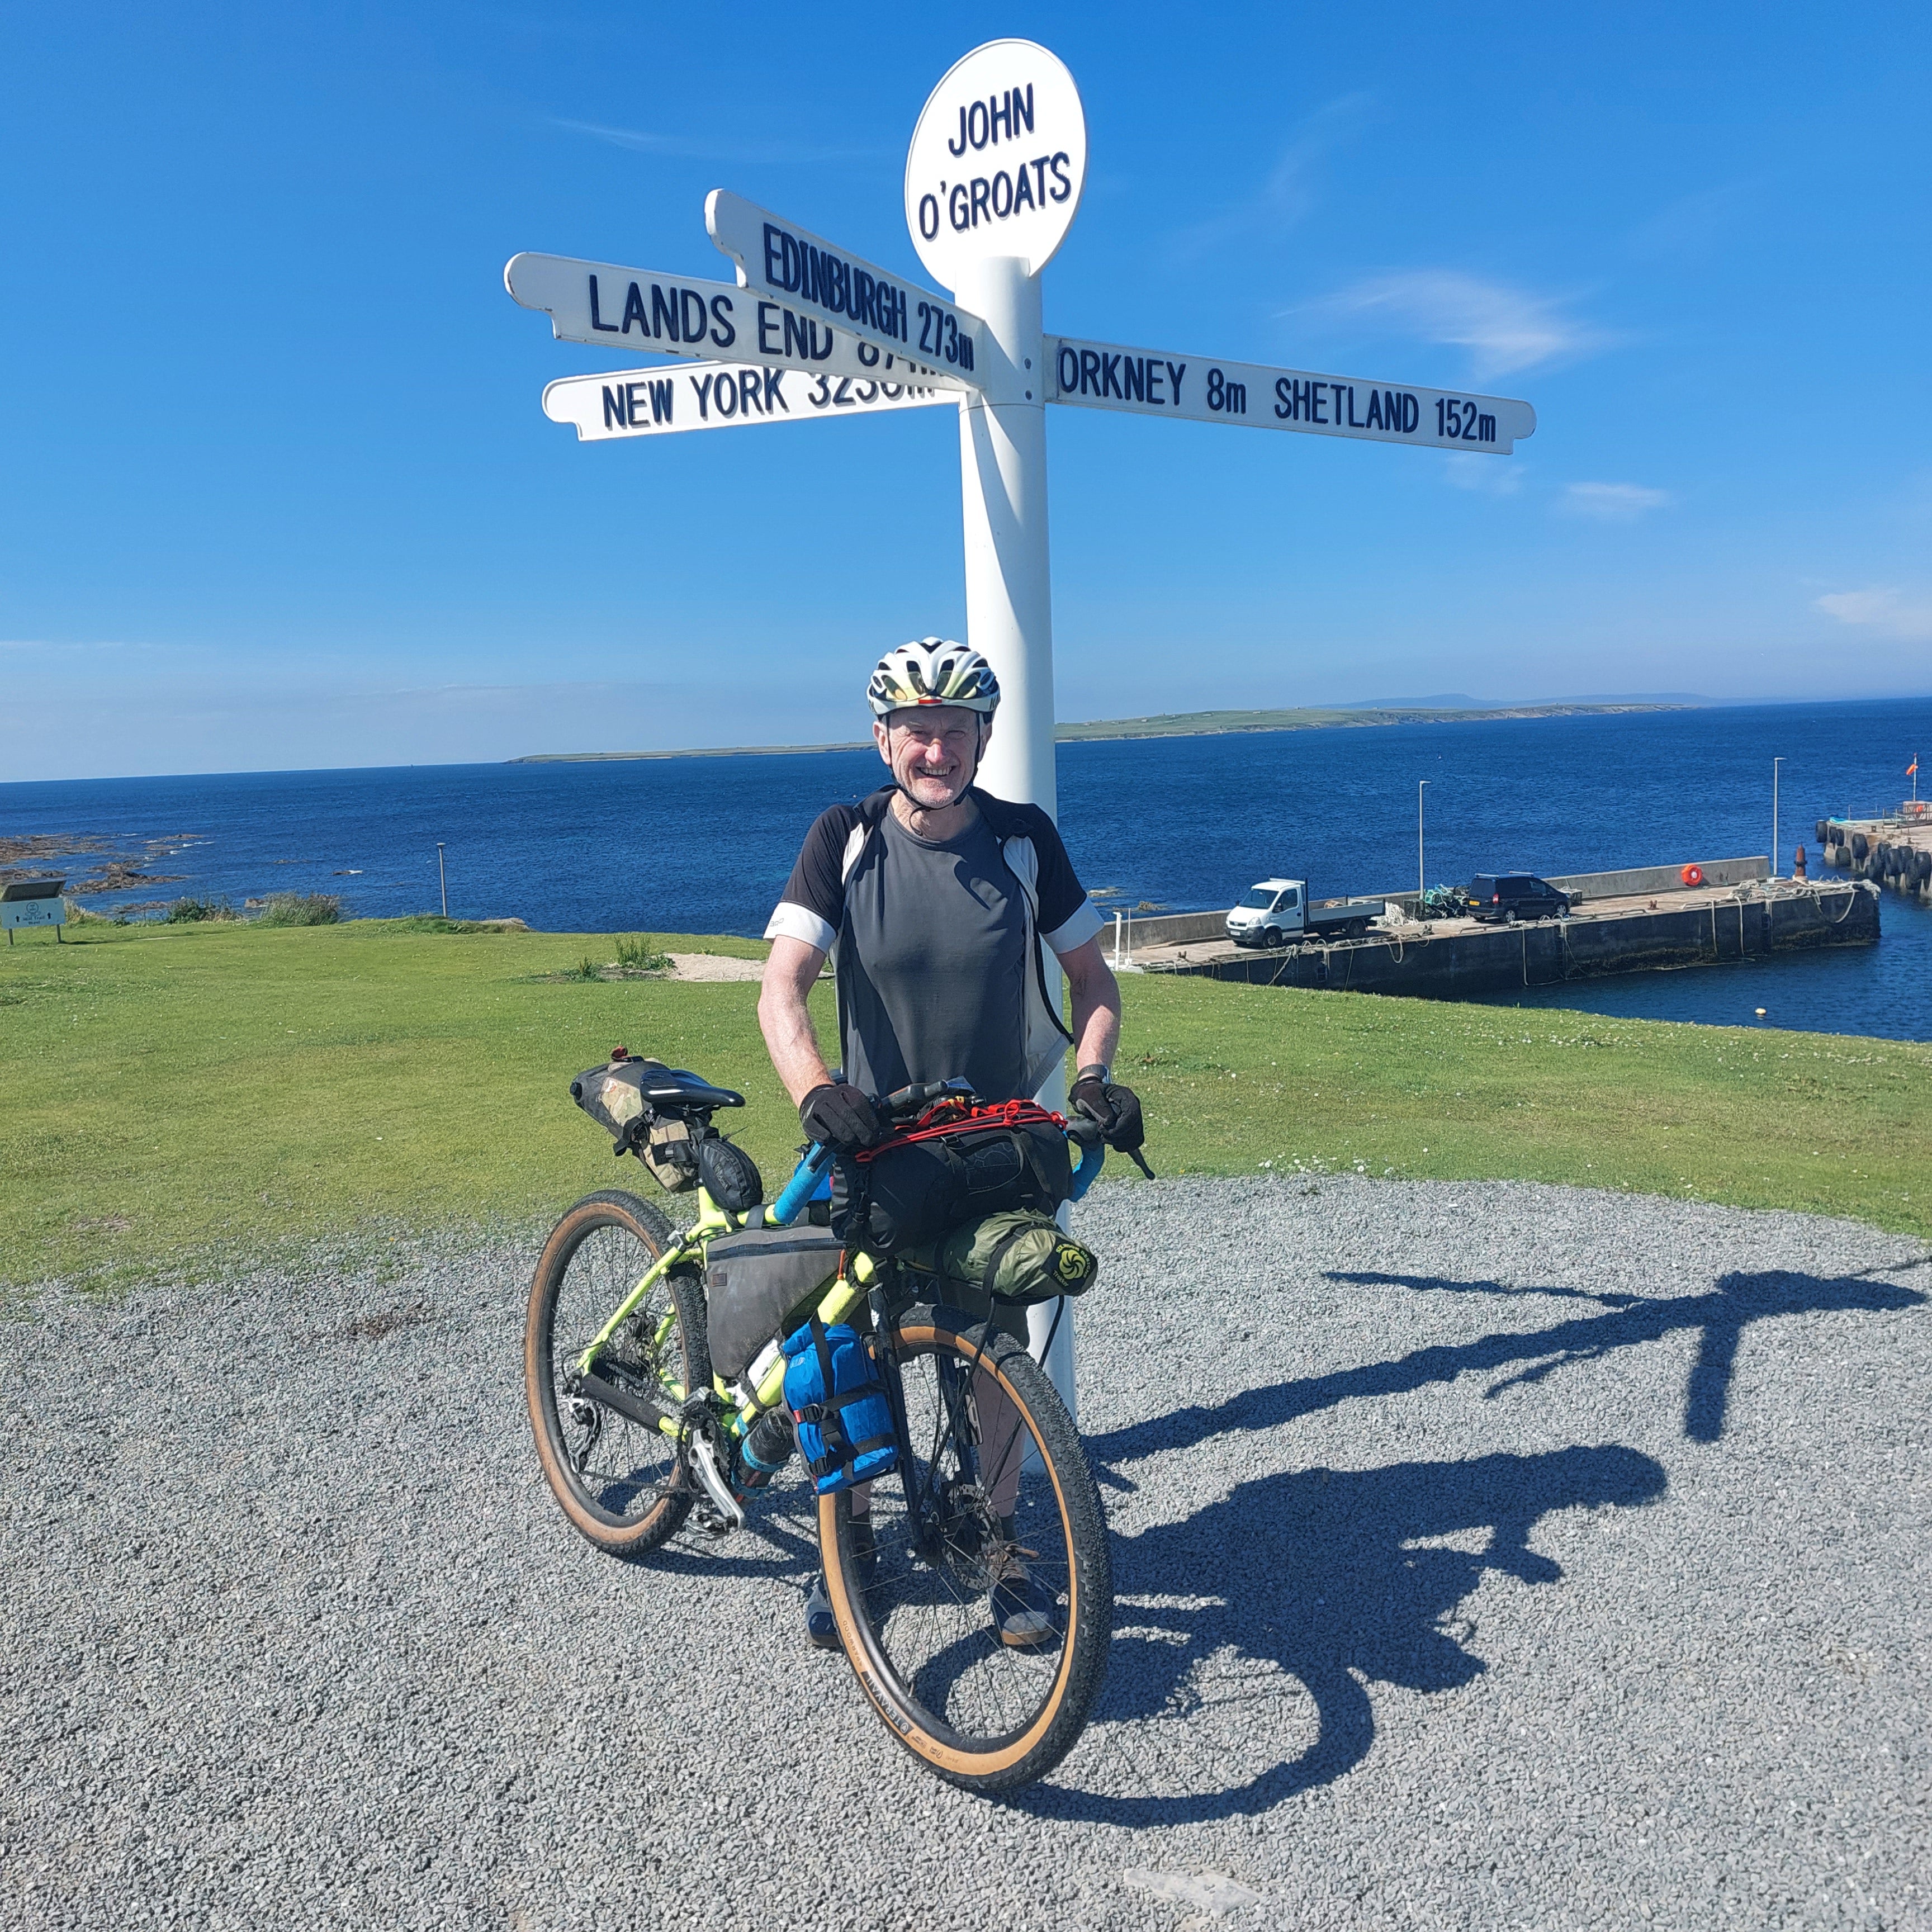 Jim Sutherland's Fundraising Bikepacking Trip from Land's End to John o'Groats - Part 3